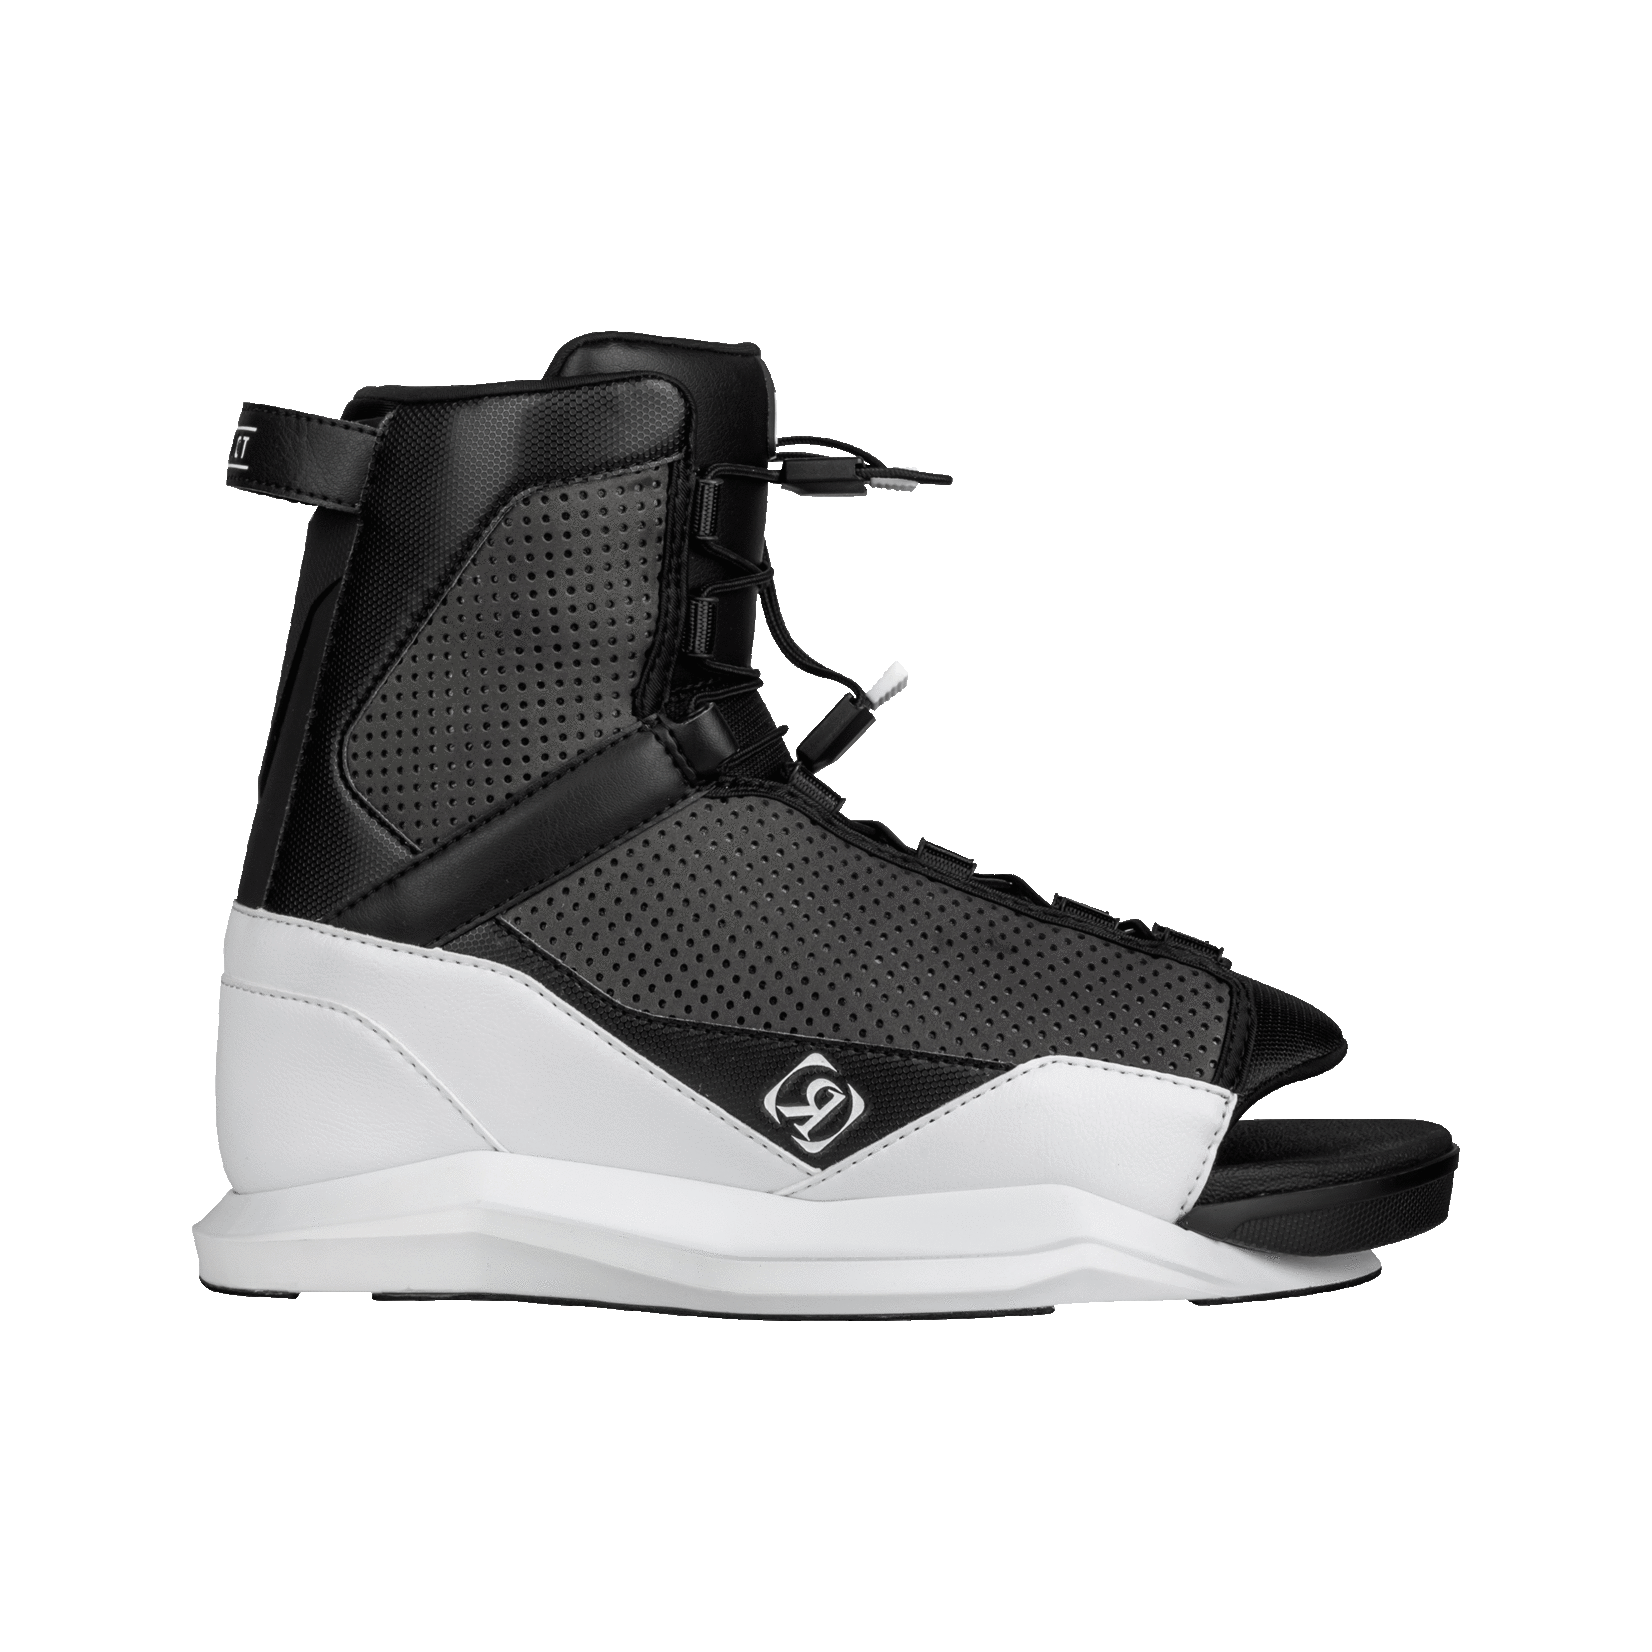 Ronix Ronix district 23 boots